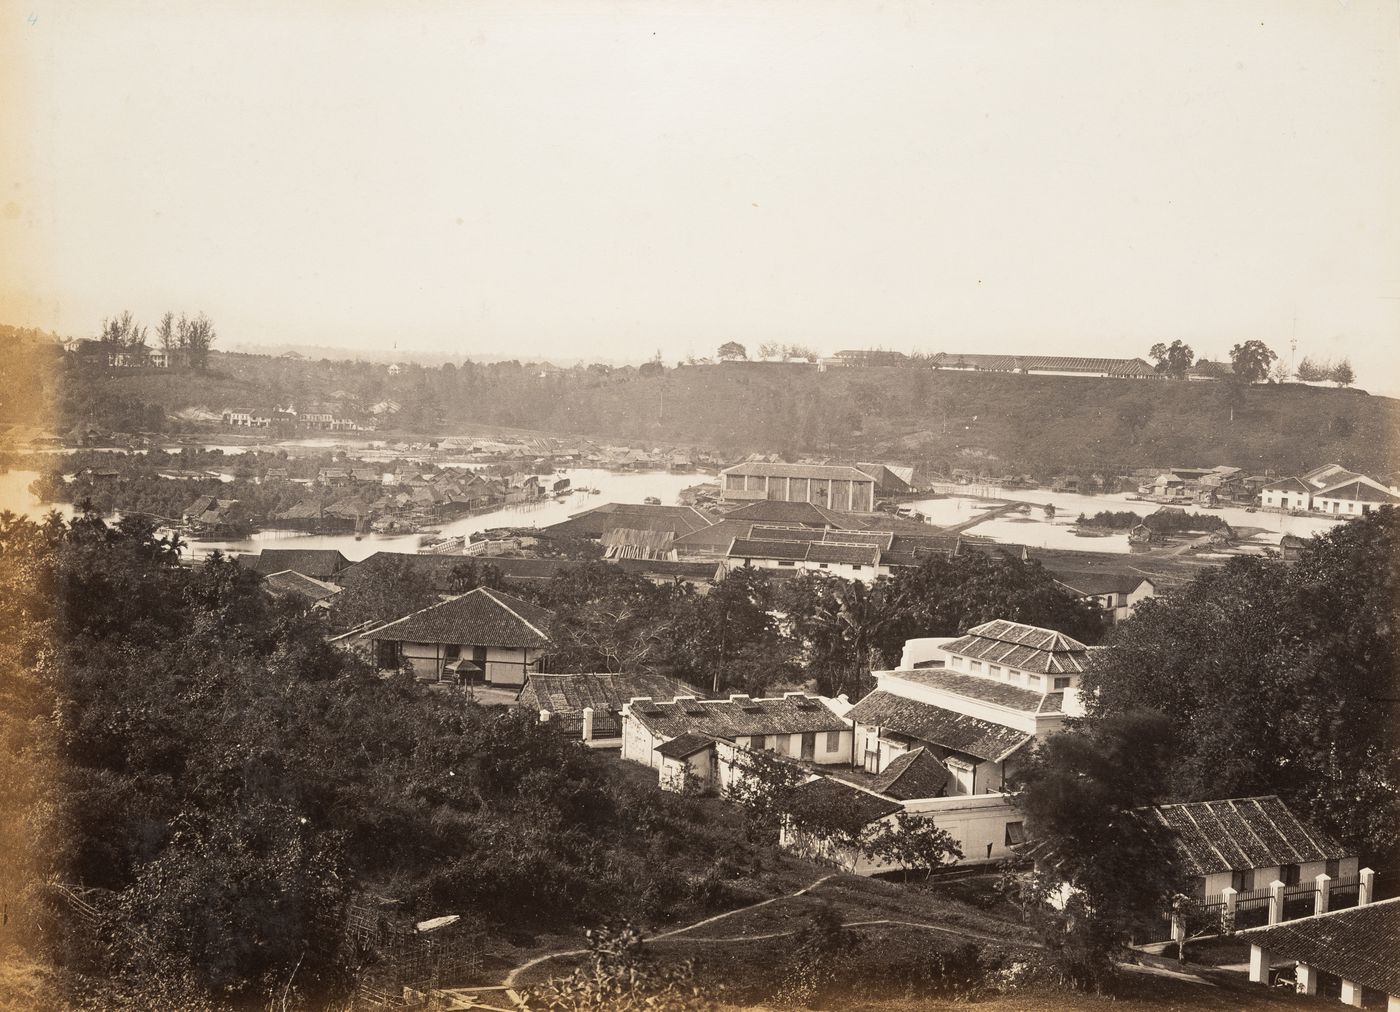 View of a Malay Village with Fort Canning ? on the hill, Singapore